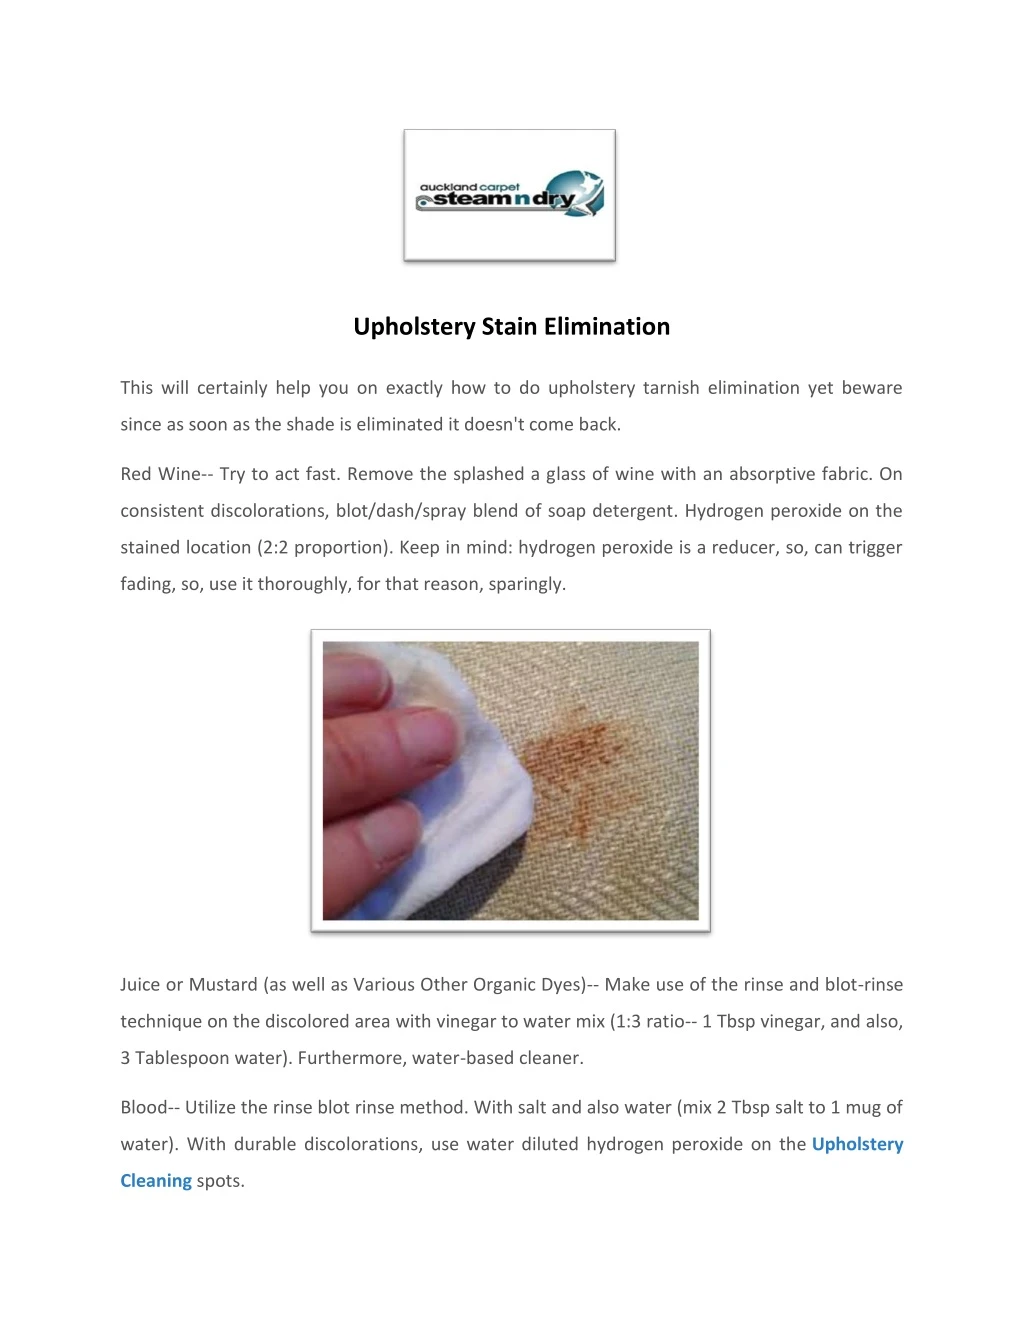 upholstery stain elimination